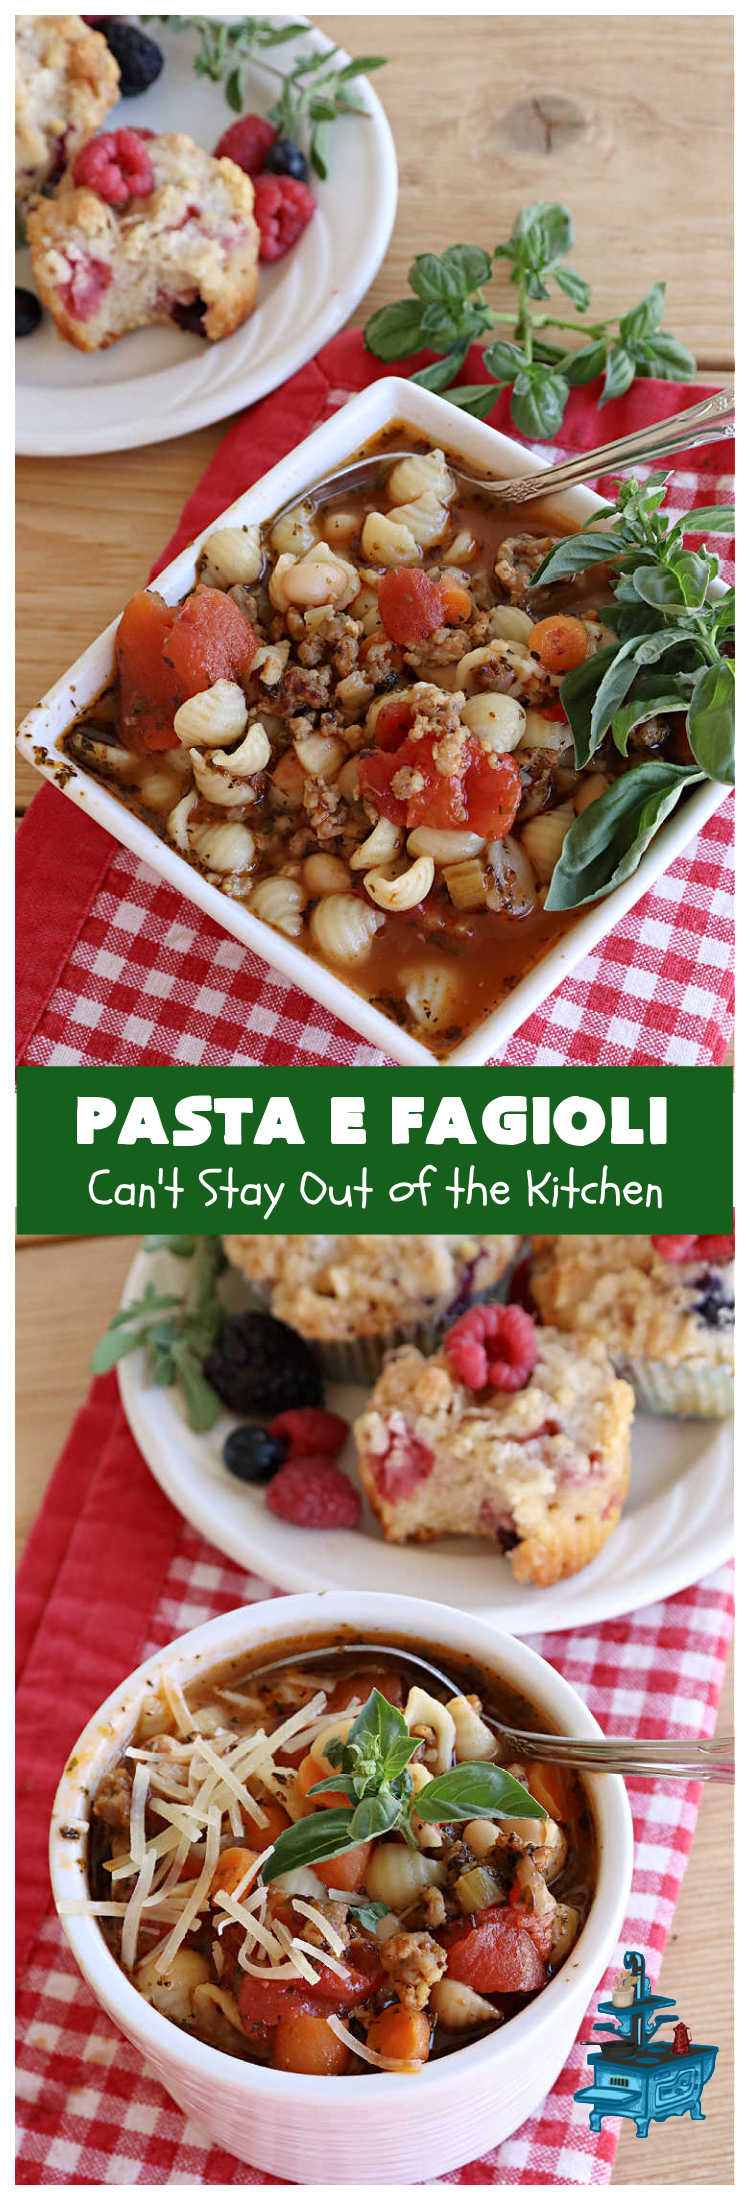 Pasta E Fagioli | Can't Stay Out of the Kitchen | this dynamite #recipe for #PastaEFagioli can't be beat. It's easy to whip up so it's perfect for weeknight dinners. If you enjoy a bowl of hot #soup on cool, fall nights, this one sure hits the spot. #pasta #pork #SeaShellPasta #ItalianSausage #GreatNorthernBeans #tomatoes #FallRecipes